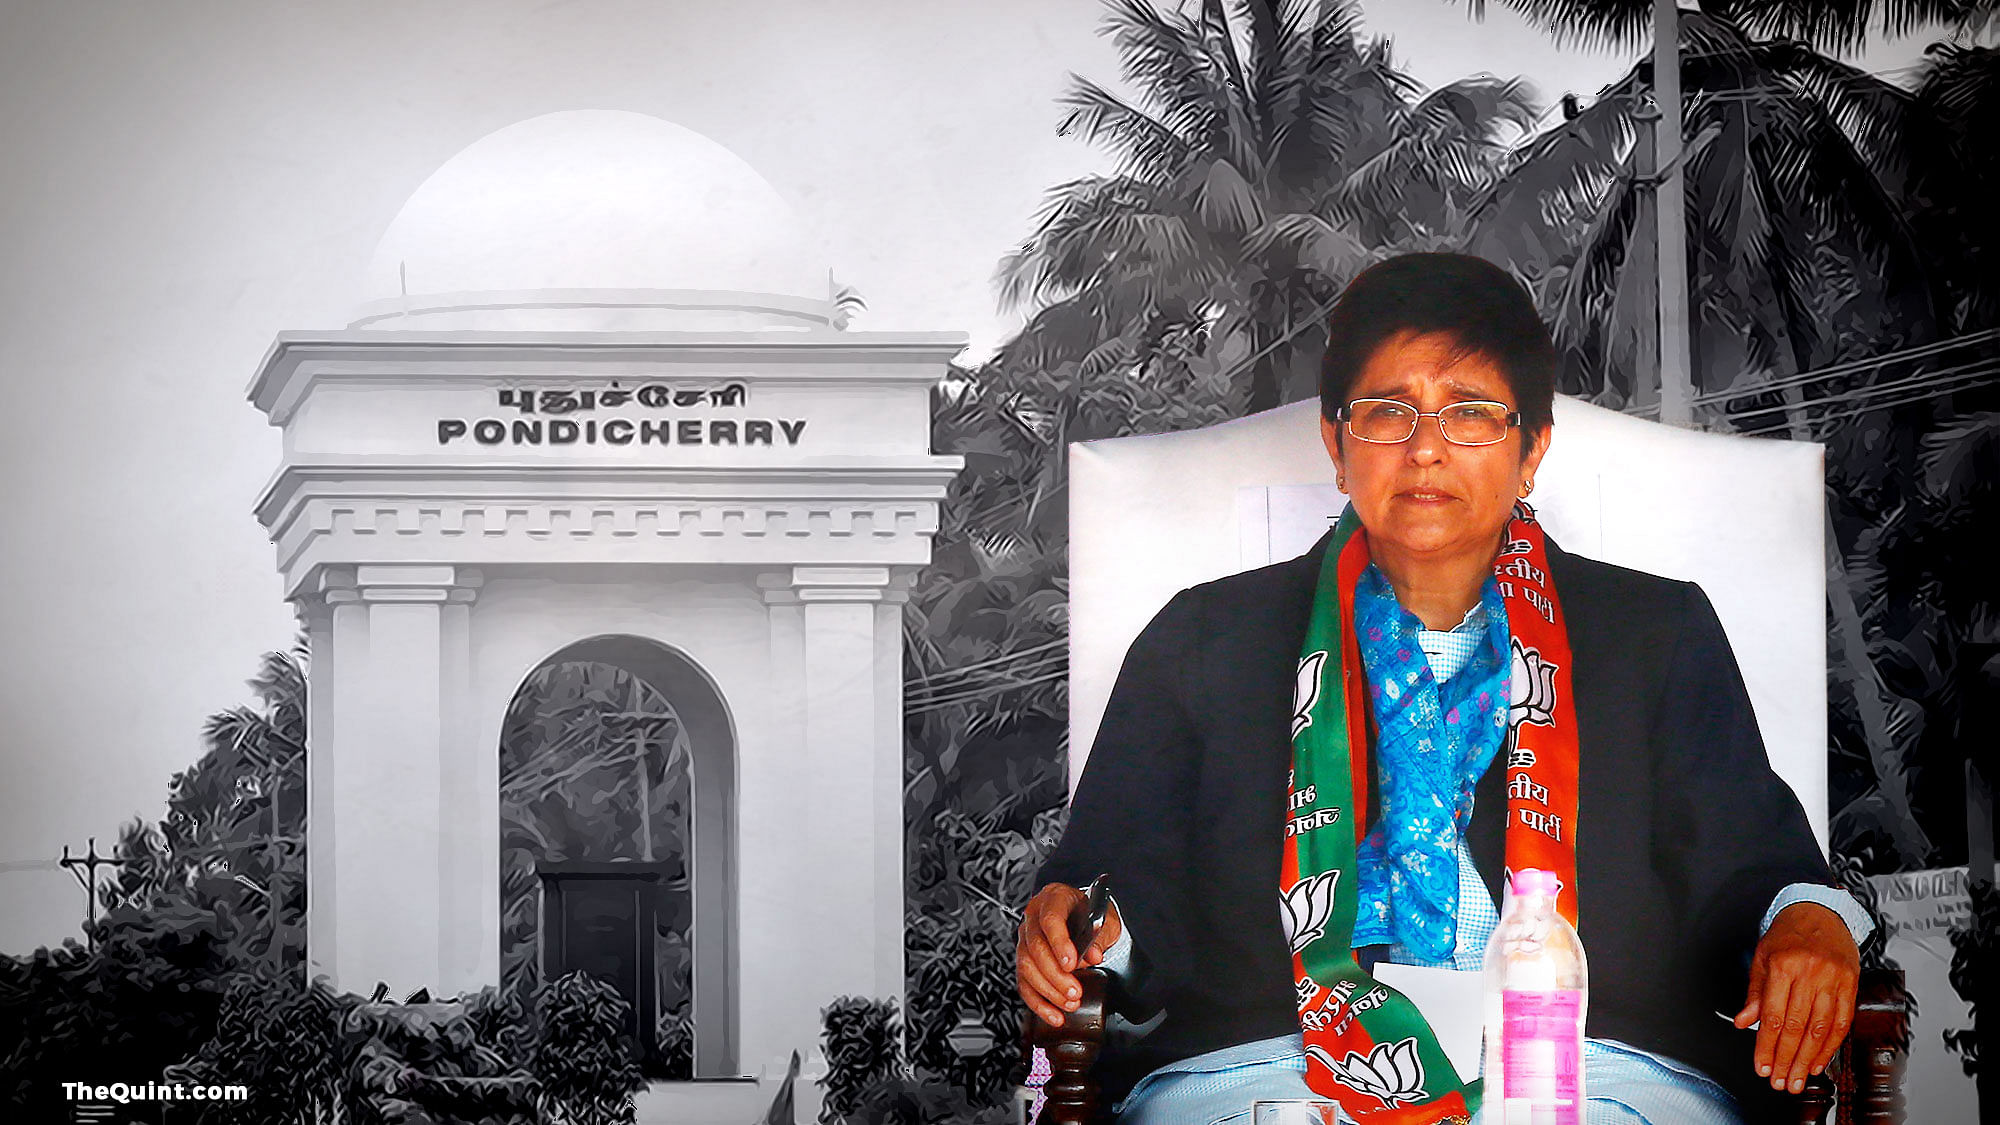 

In an email interview, Kiran Bedi admits there is ‘no alignment’ between CM and LG, justifies swearing-in of BJP leaders.